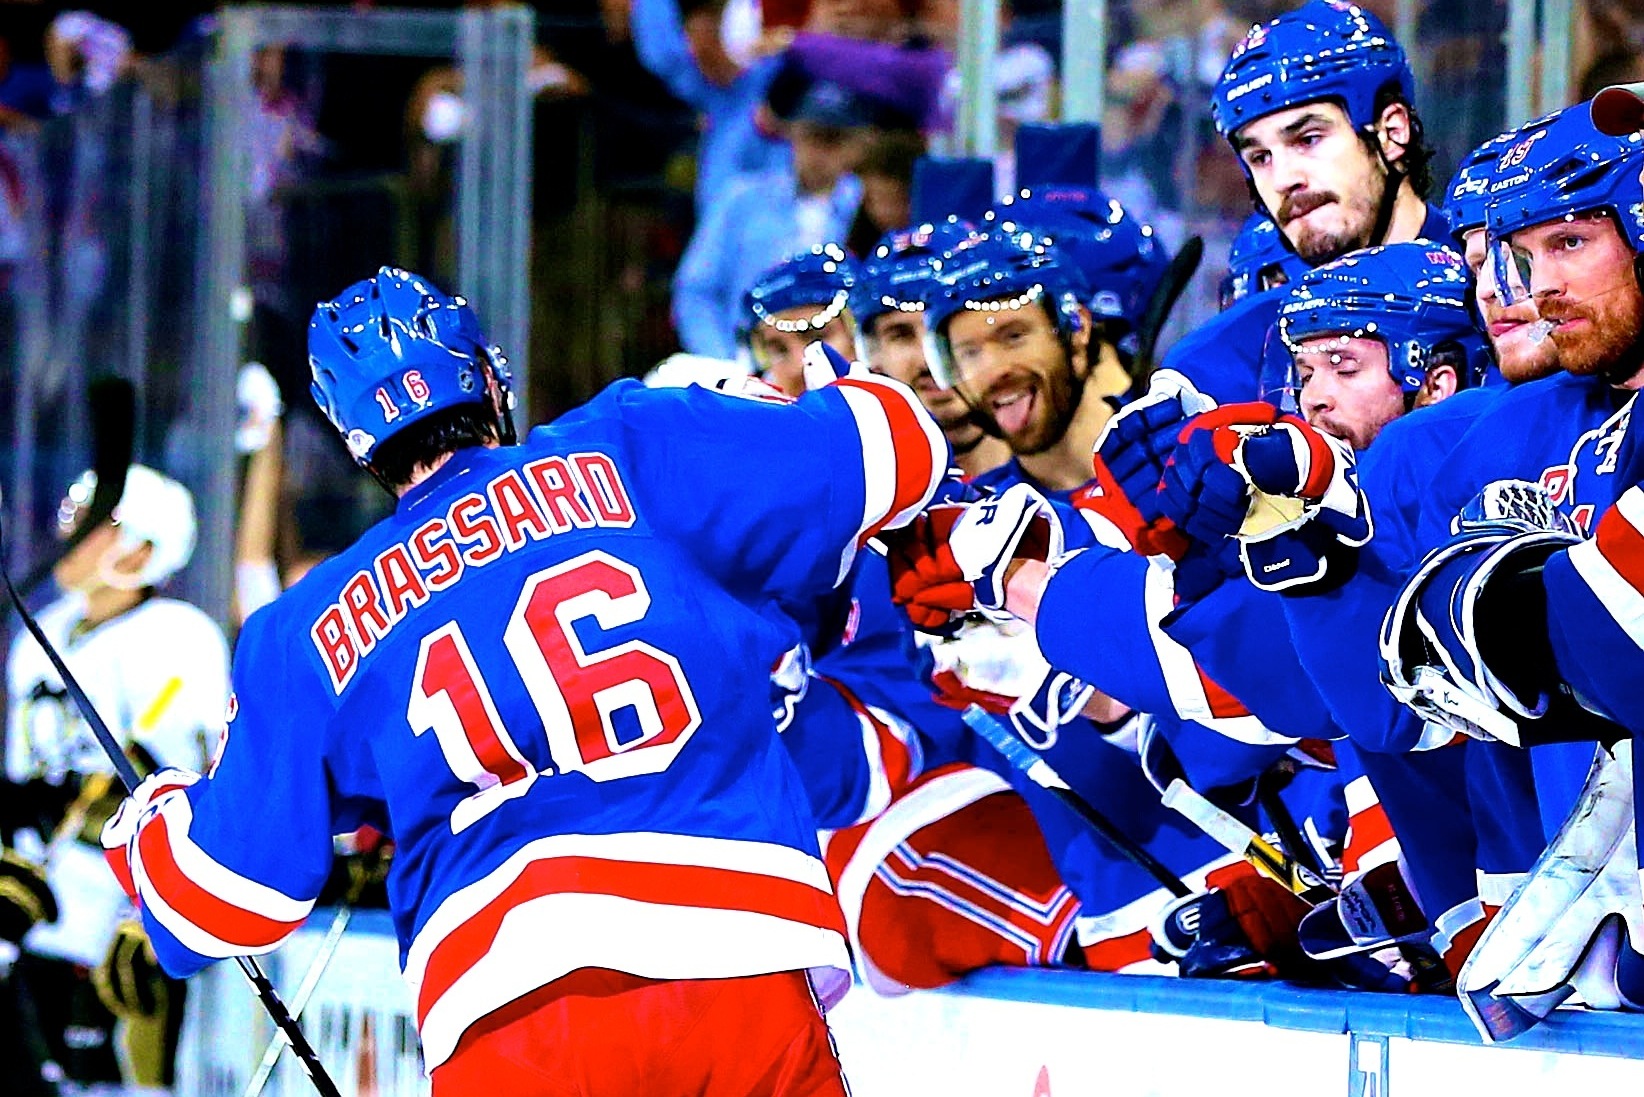 Rangers vs. Penguins Game 6 Score and Twitter Reaction from 2014 NHL